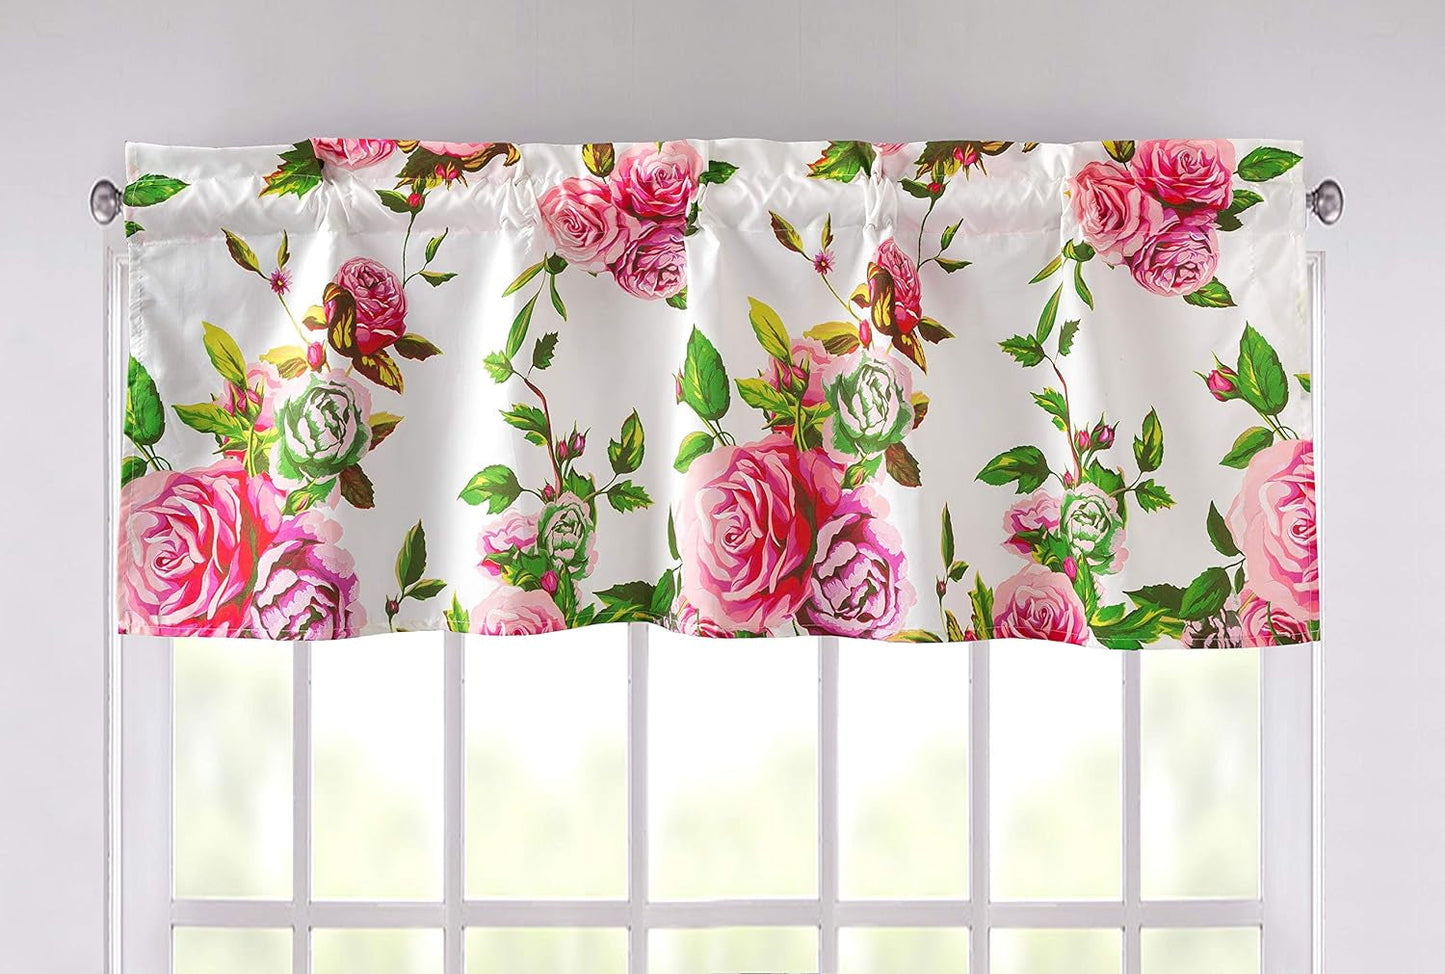 Dada Bedding Romantic Roses Floral Window Curtain Valance - Semi Sheer Natural Lighting Pink White Straight Tailored Edge - Lovely Blooming Spring Bright Vibrant Colorful Kitchen Decor - 18" X 52"